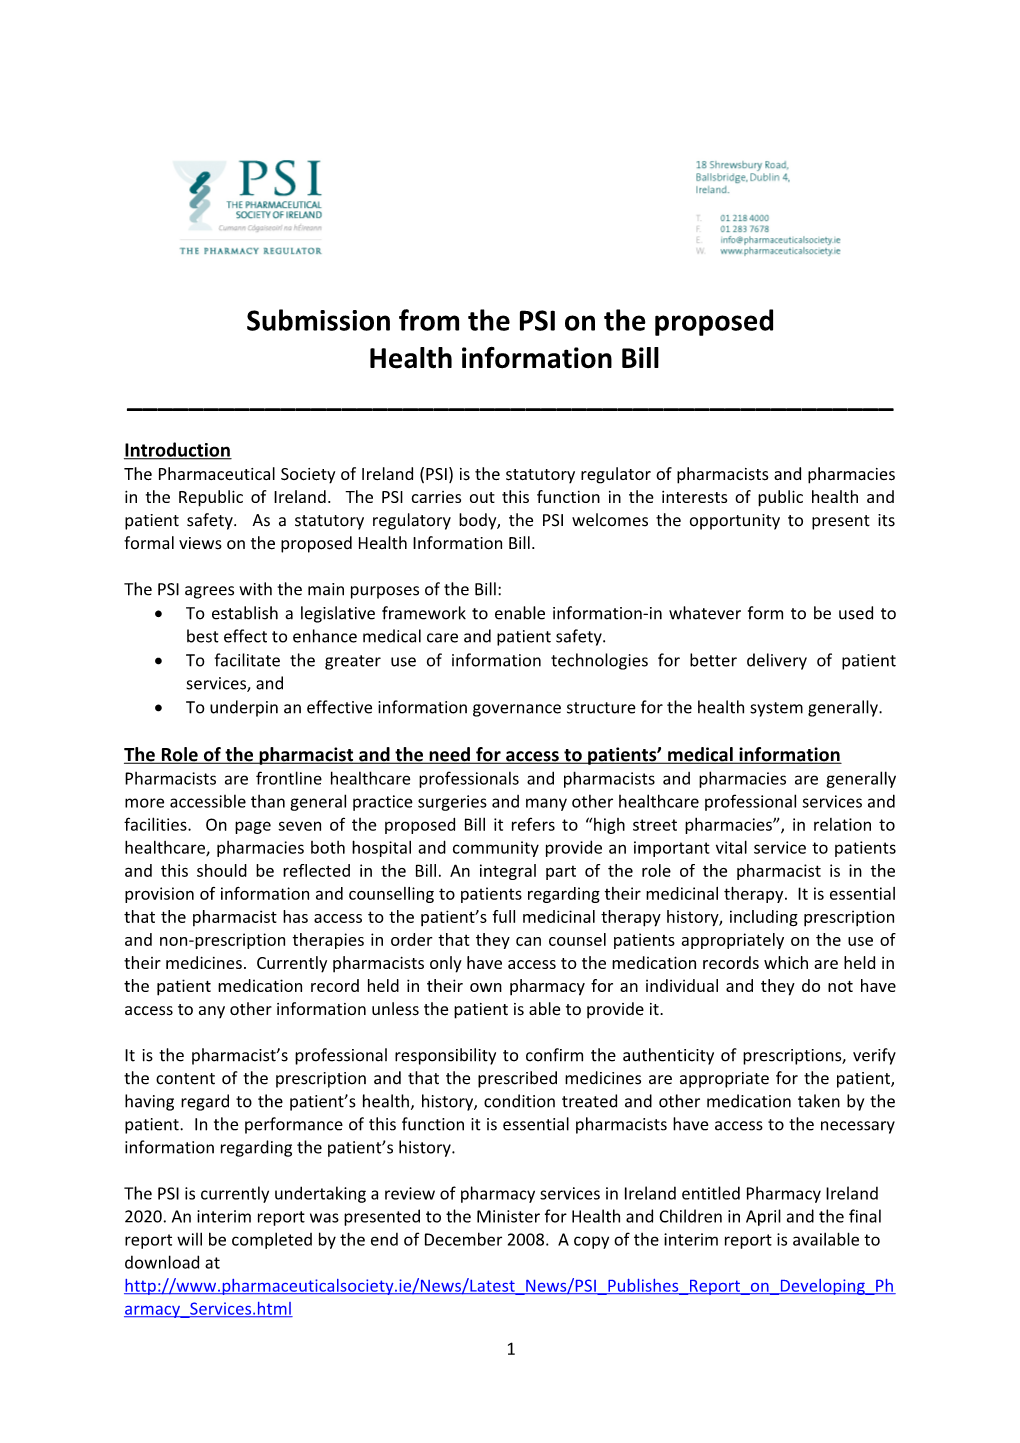 Submission from the PSI on the Proposed